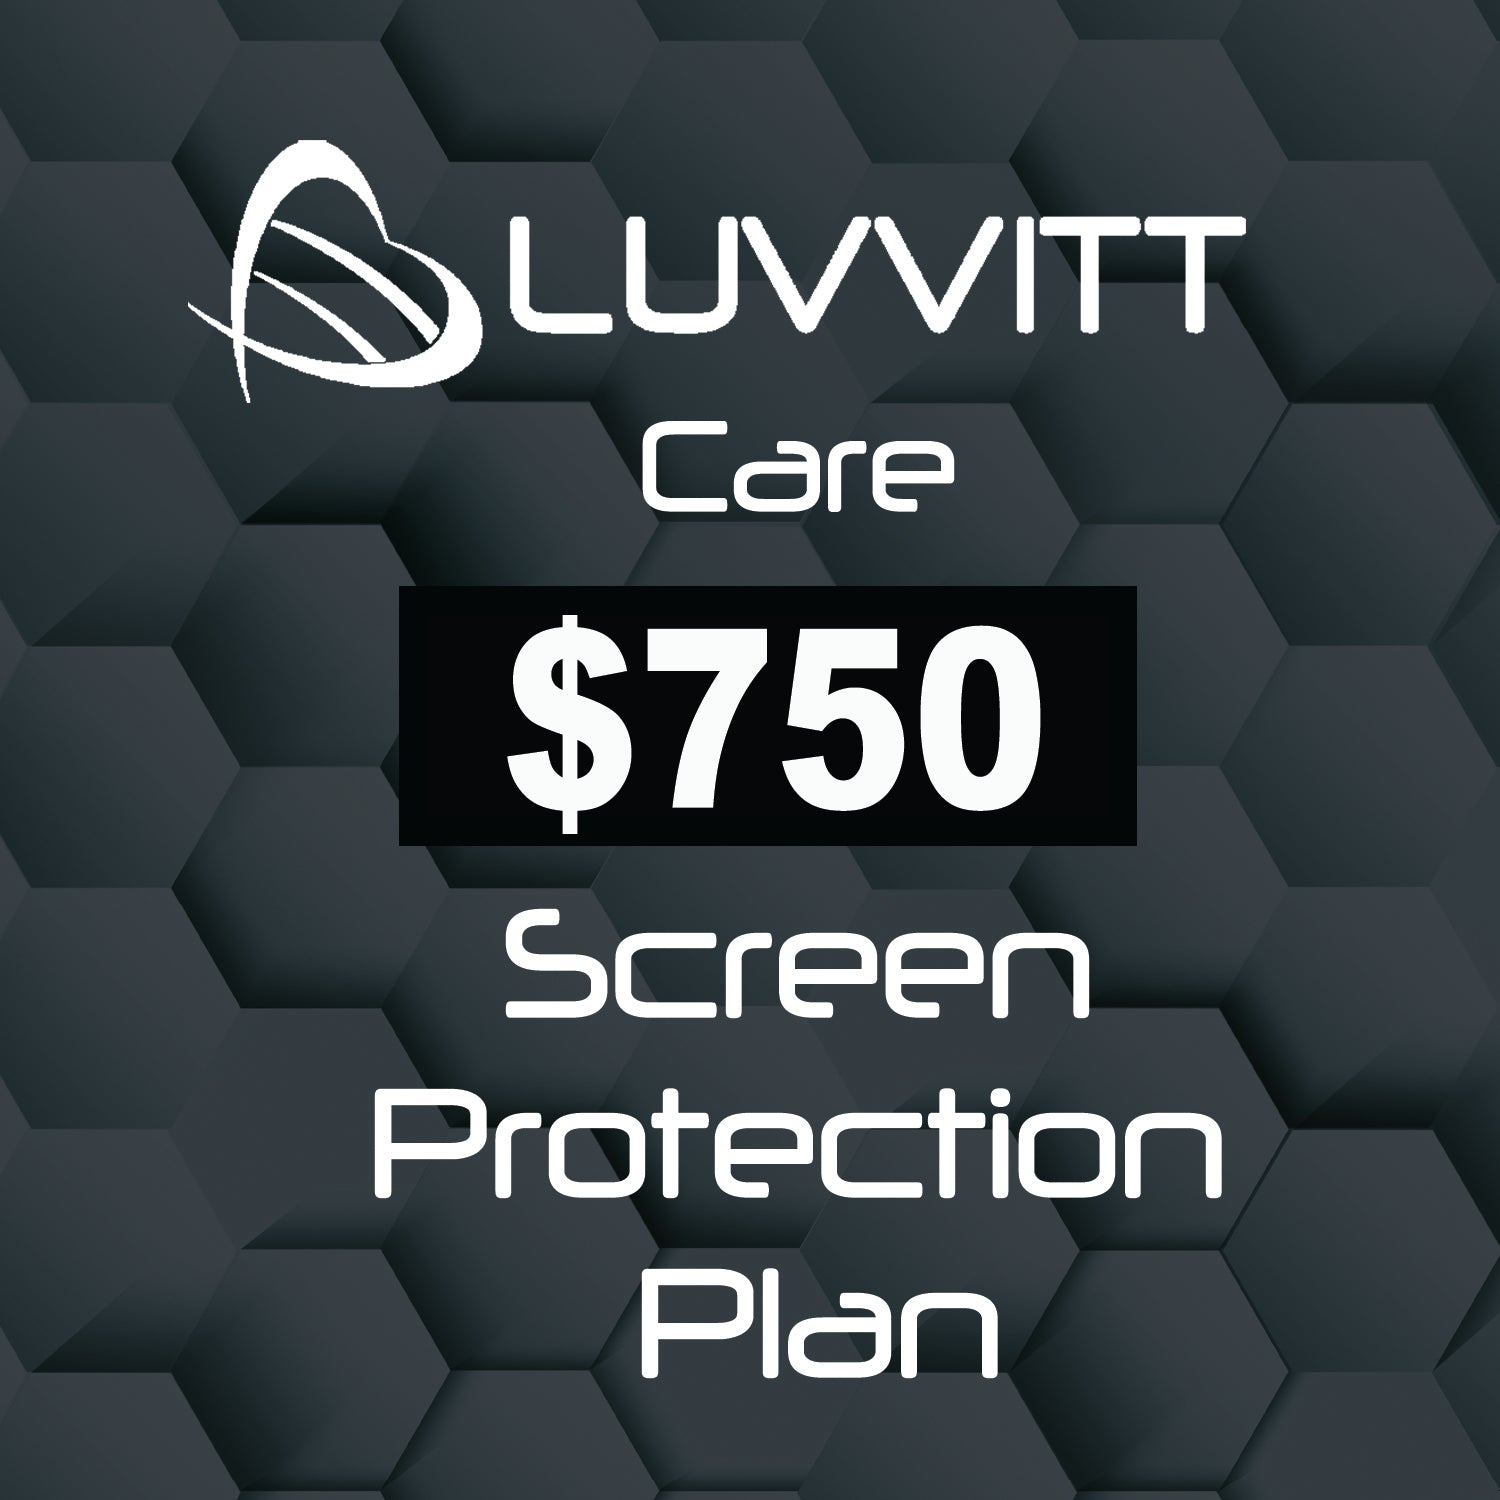 Luvvitt Care $750 Screen Protection Coverage for all Mobile Devices